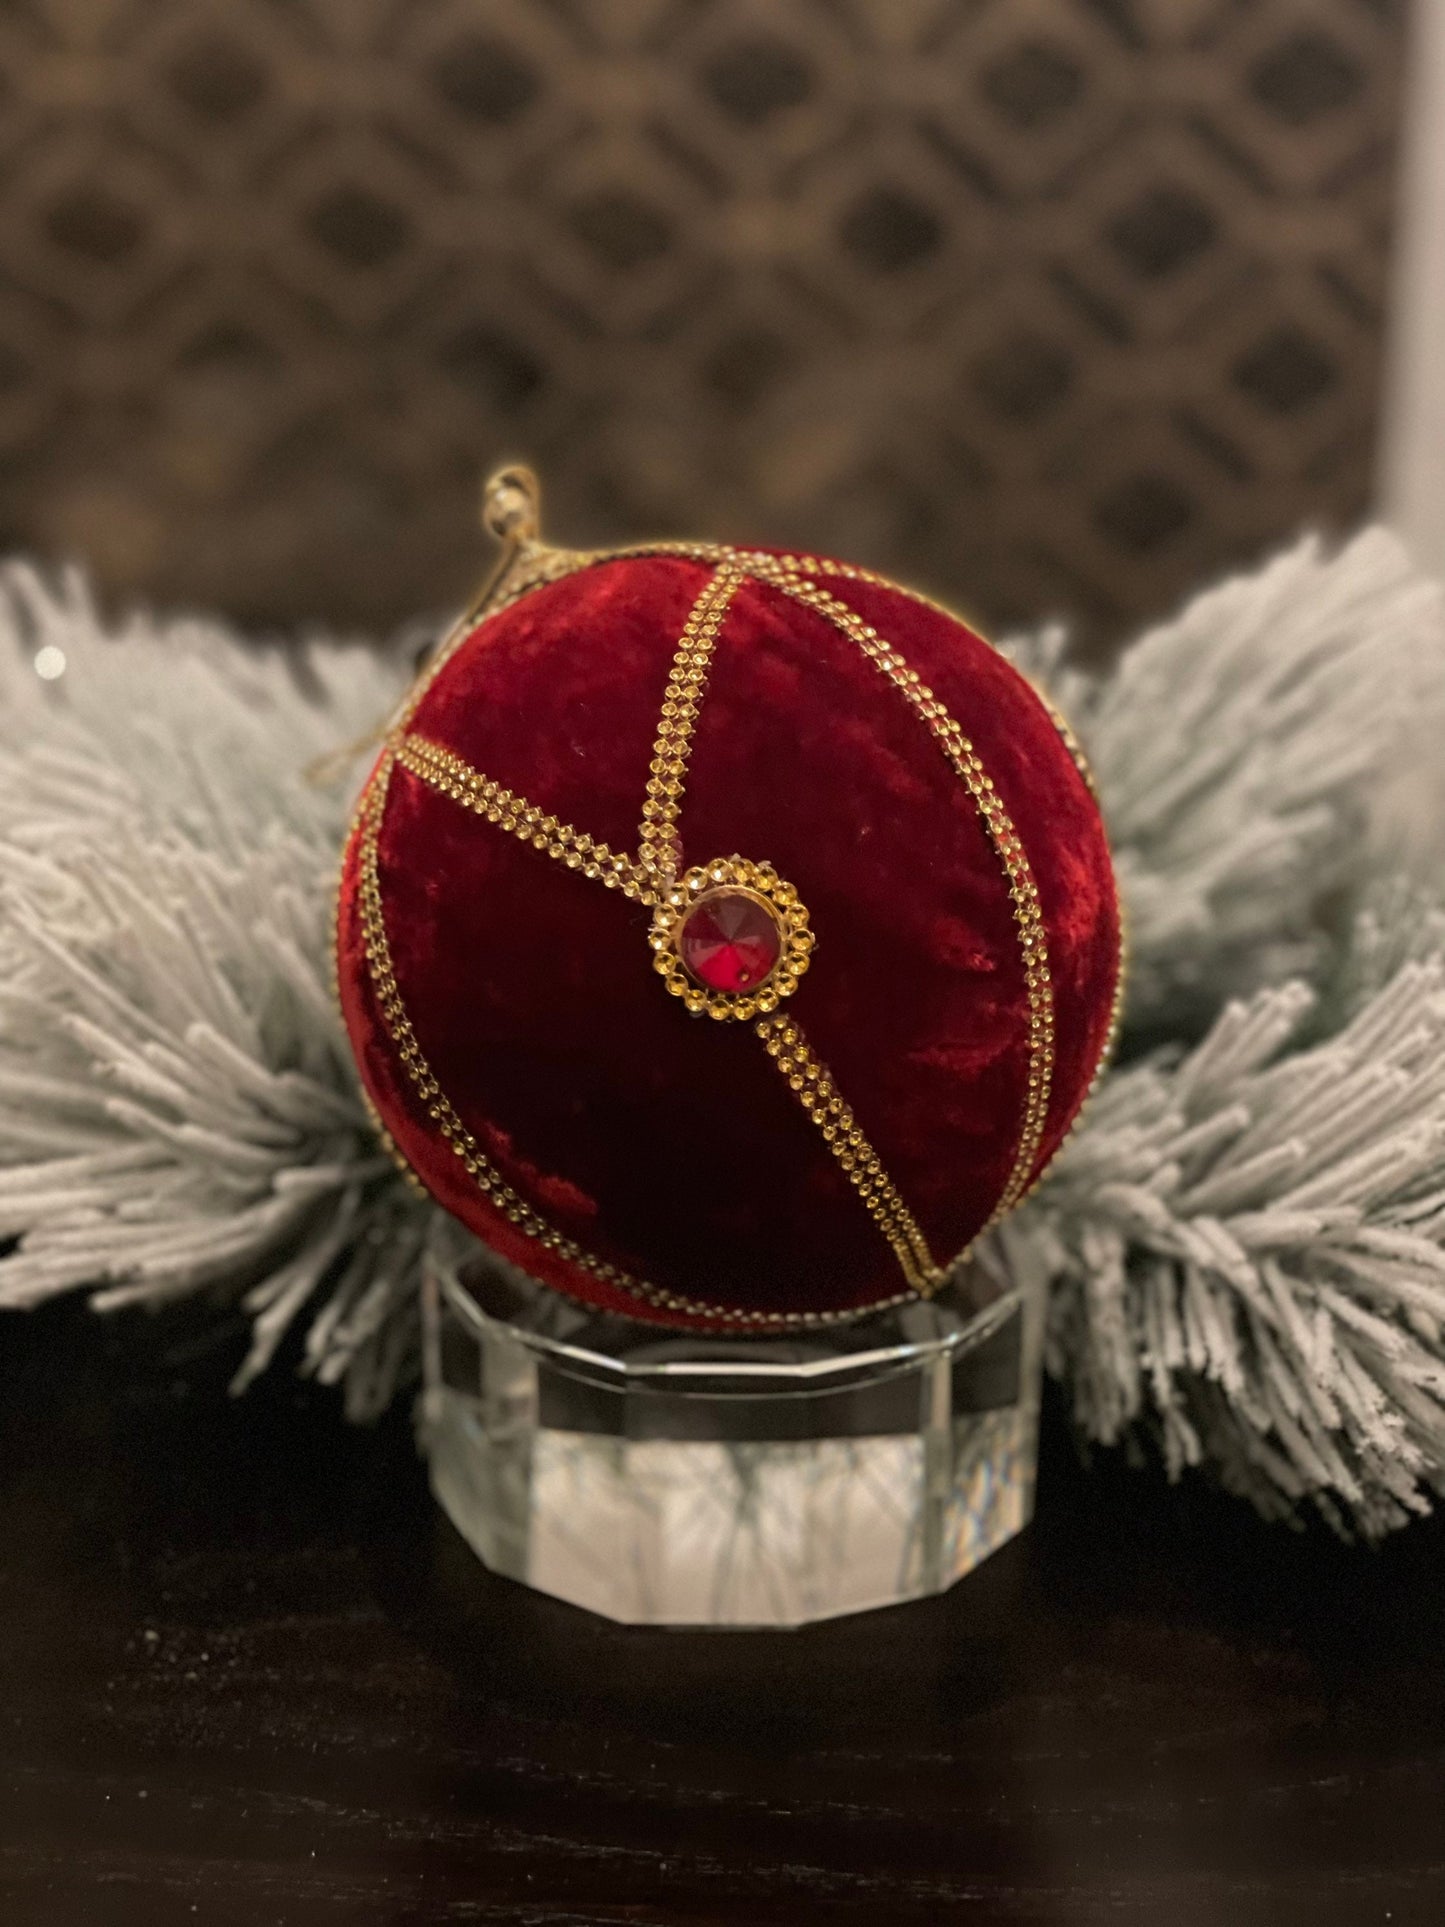 6” Jeweled velvet ball ornament red and gold.